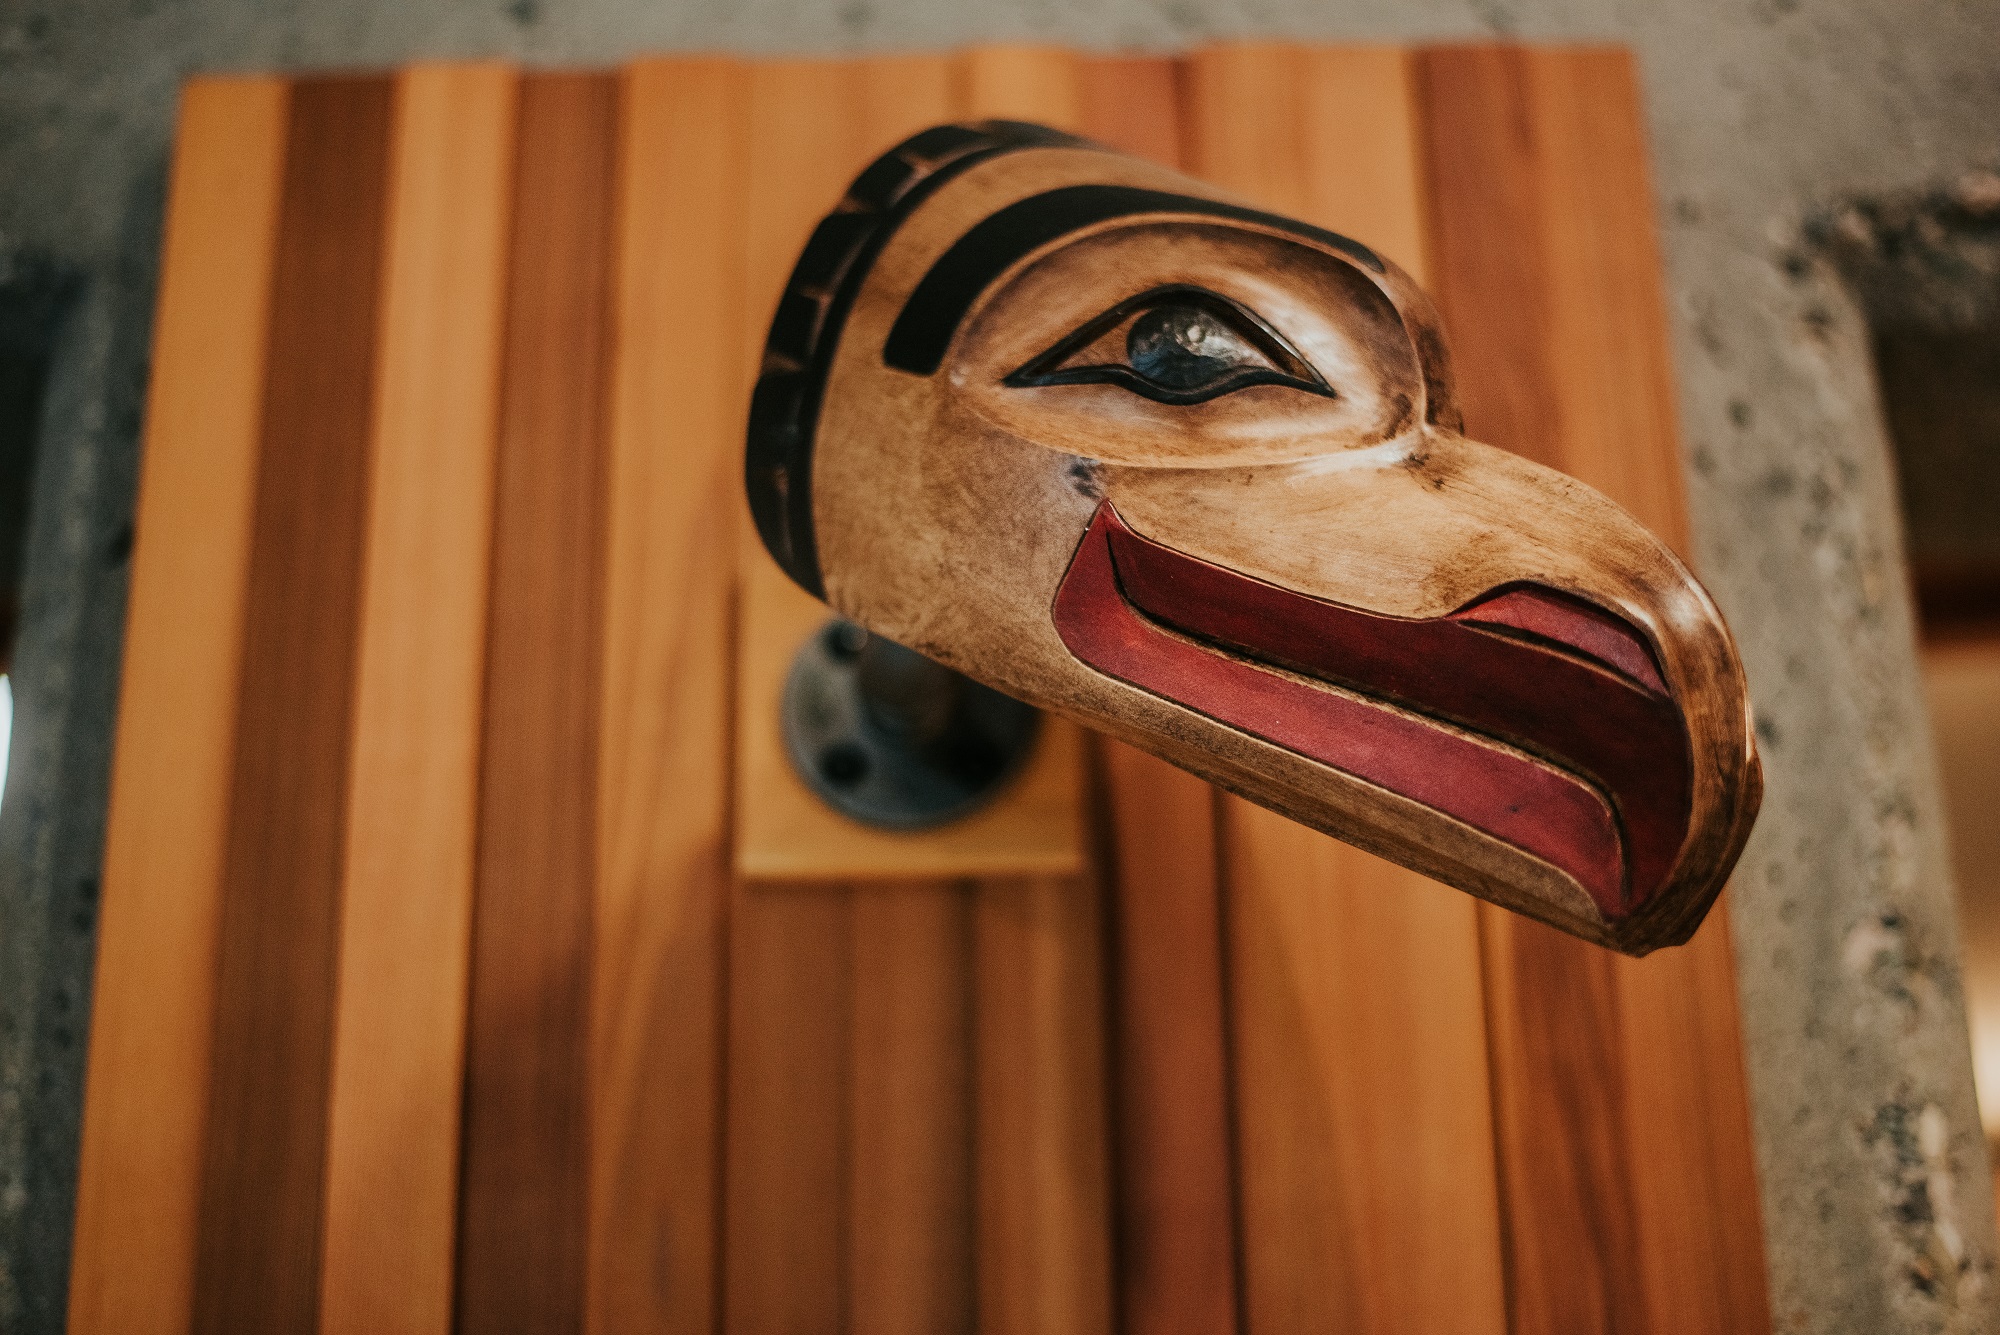 Indigenous Wood Carving